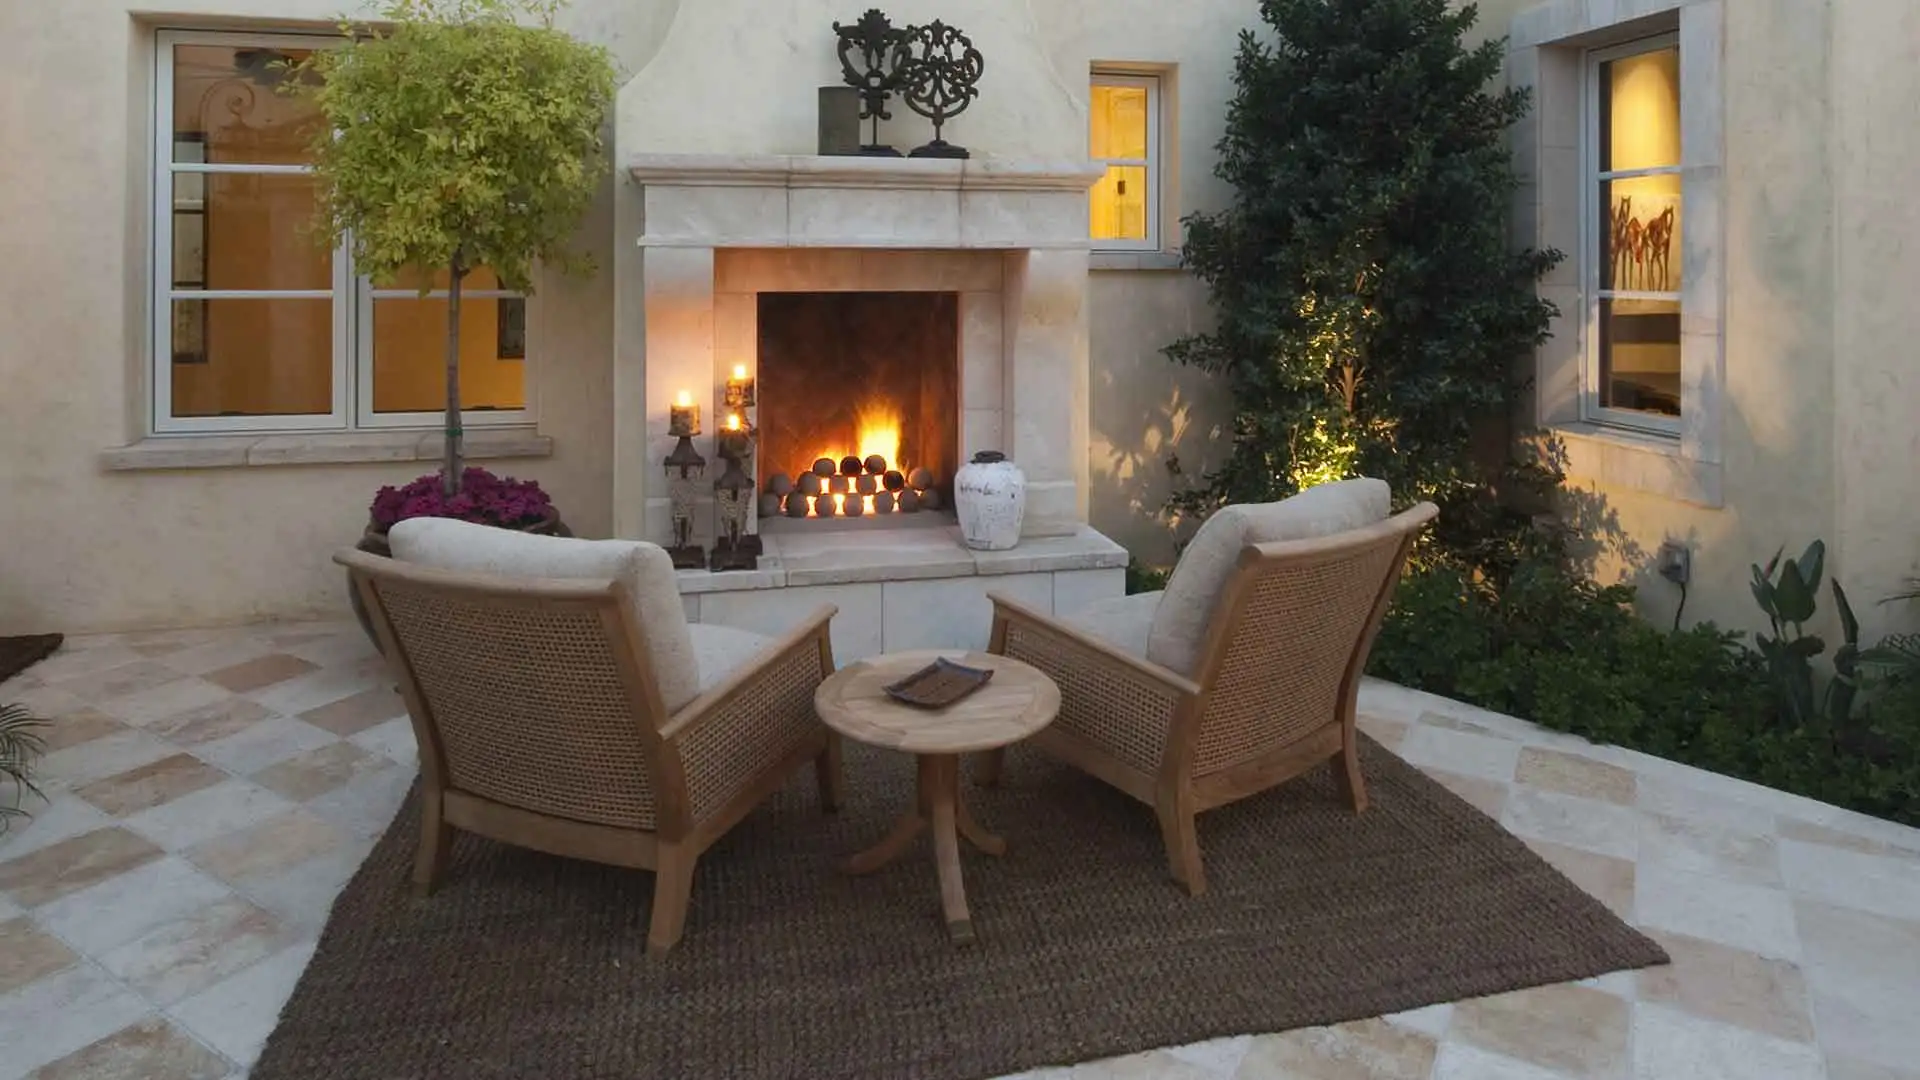 This custom outdoor fireplace adds entertainment space to this Manalapan, FL estate.